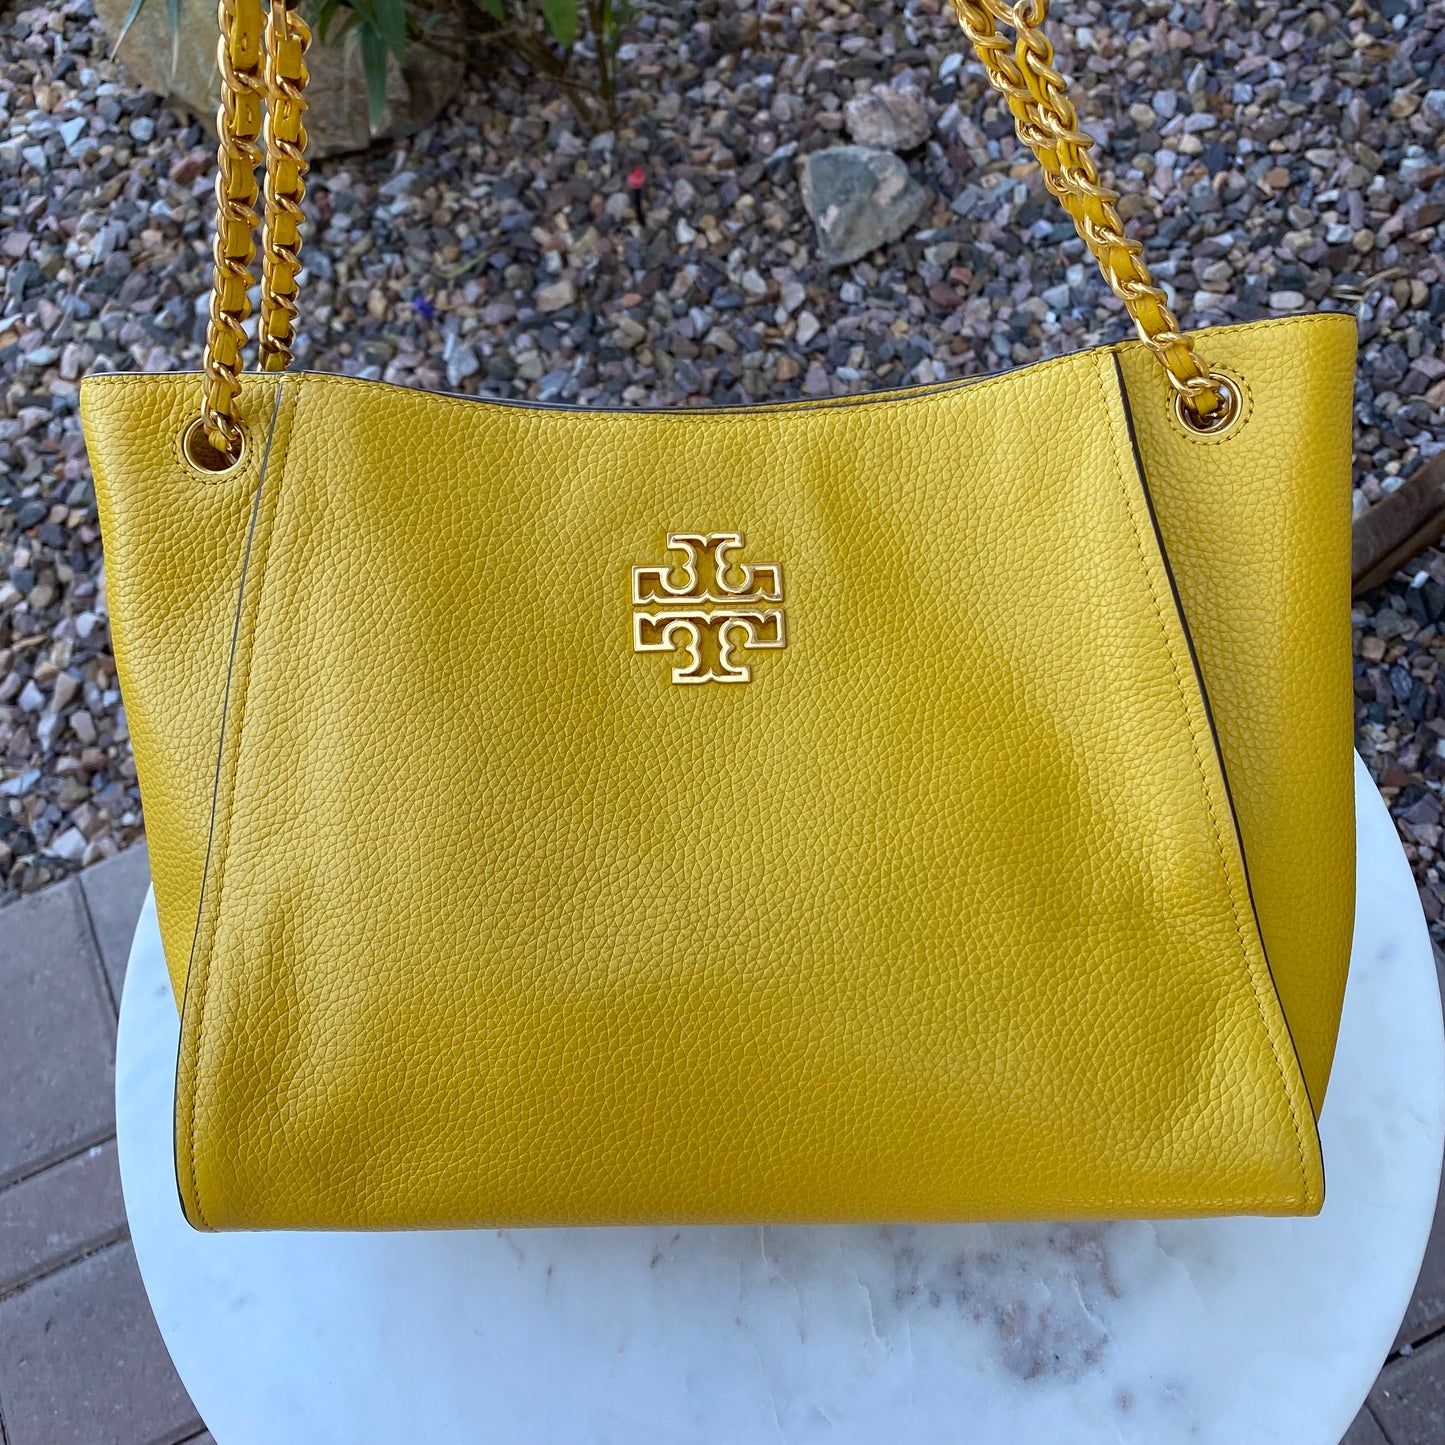 Tory Burch Britten Slouchy Chain Pebbled Leather Tote